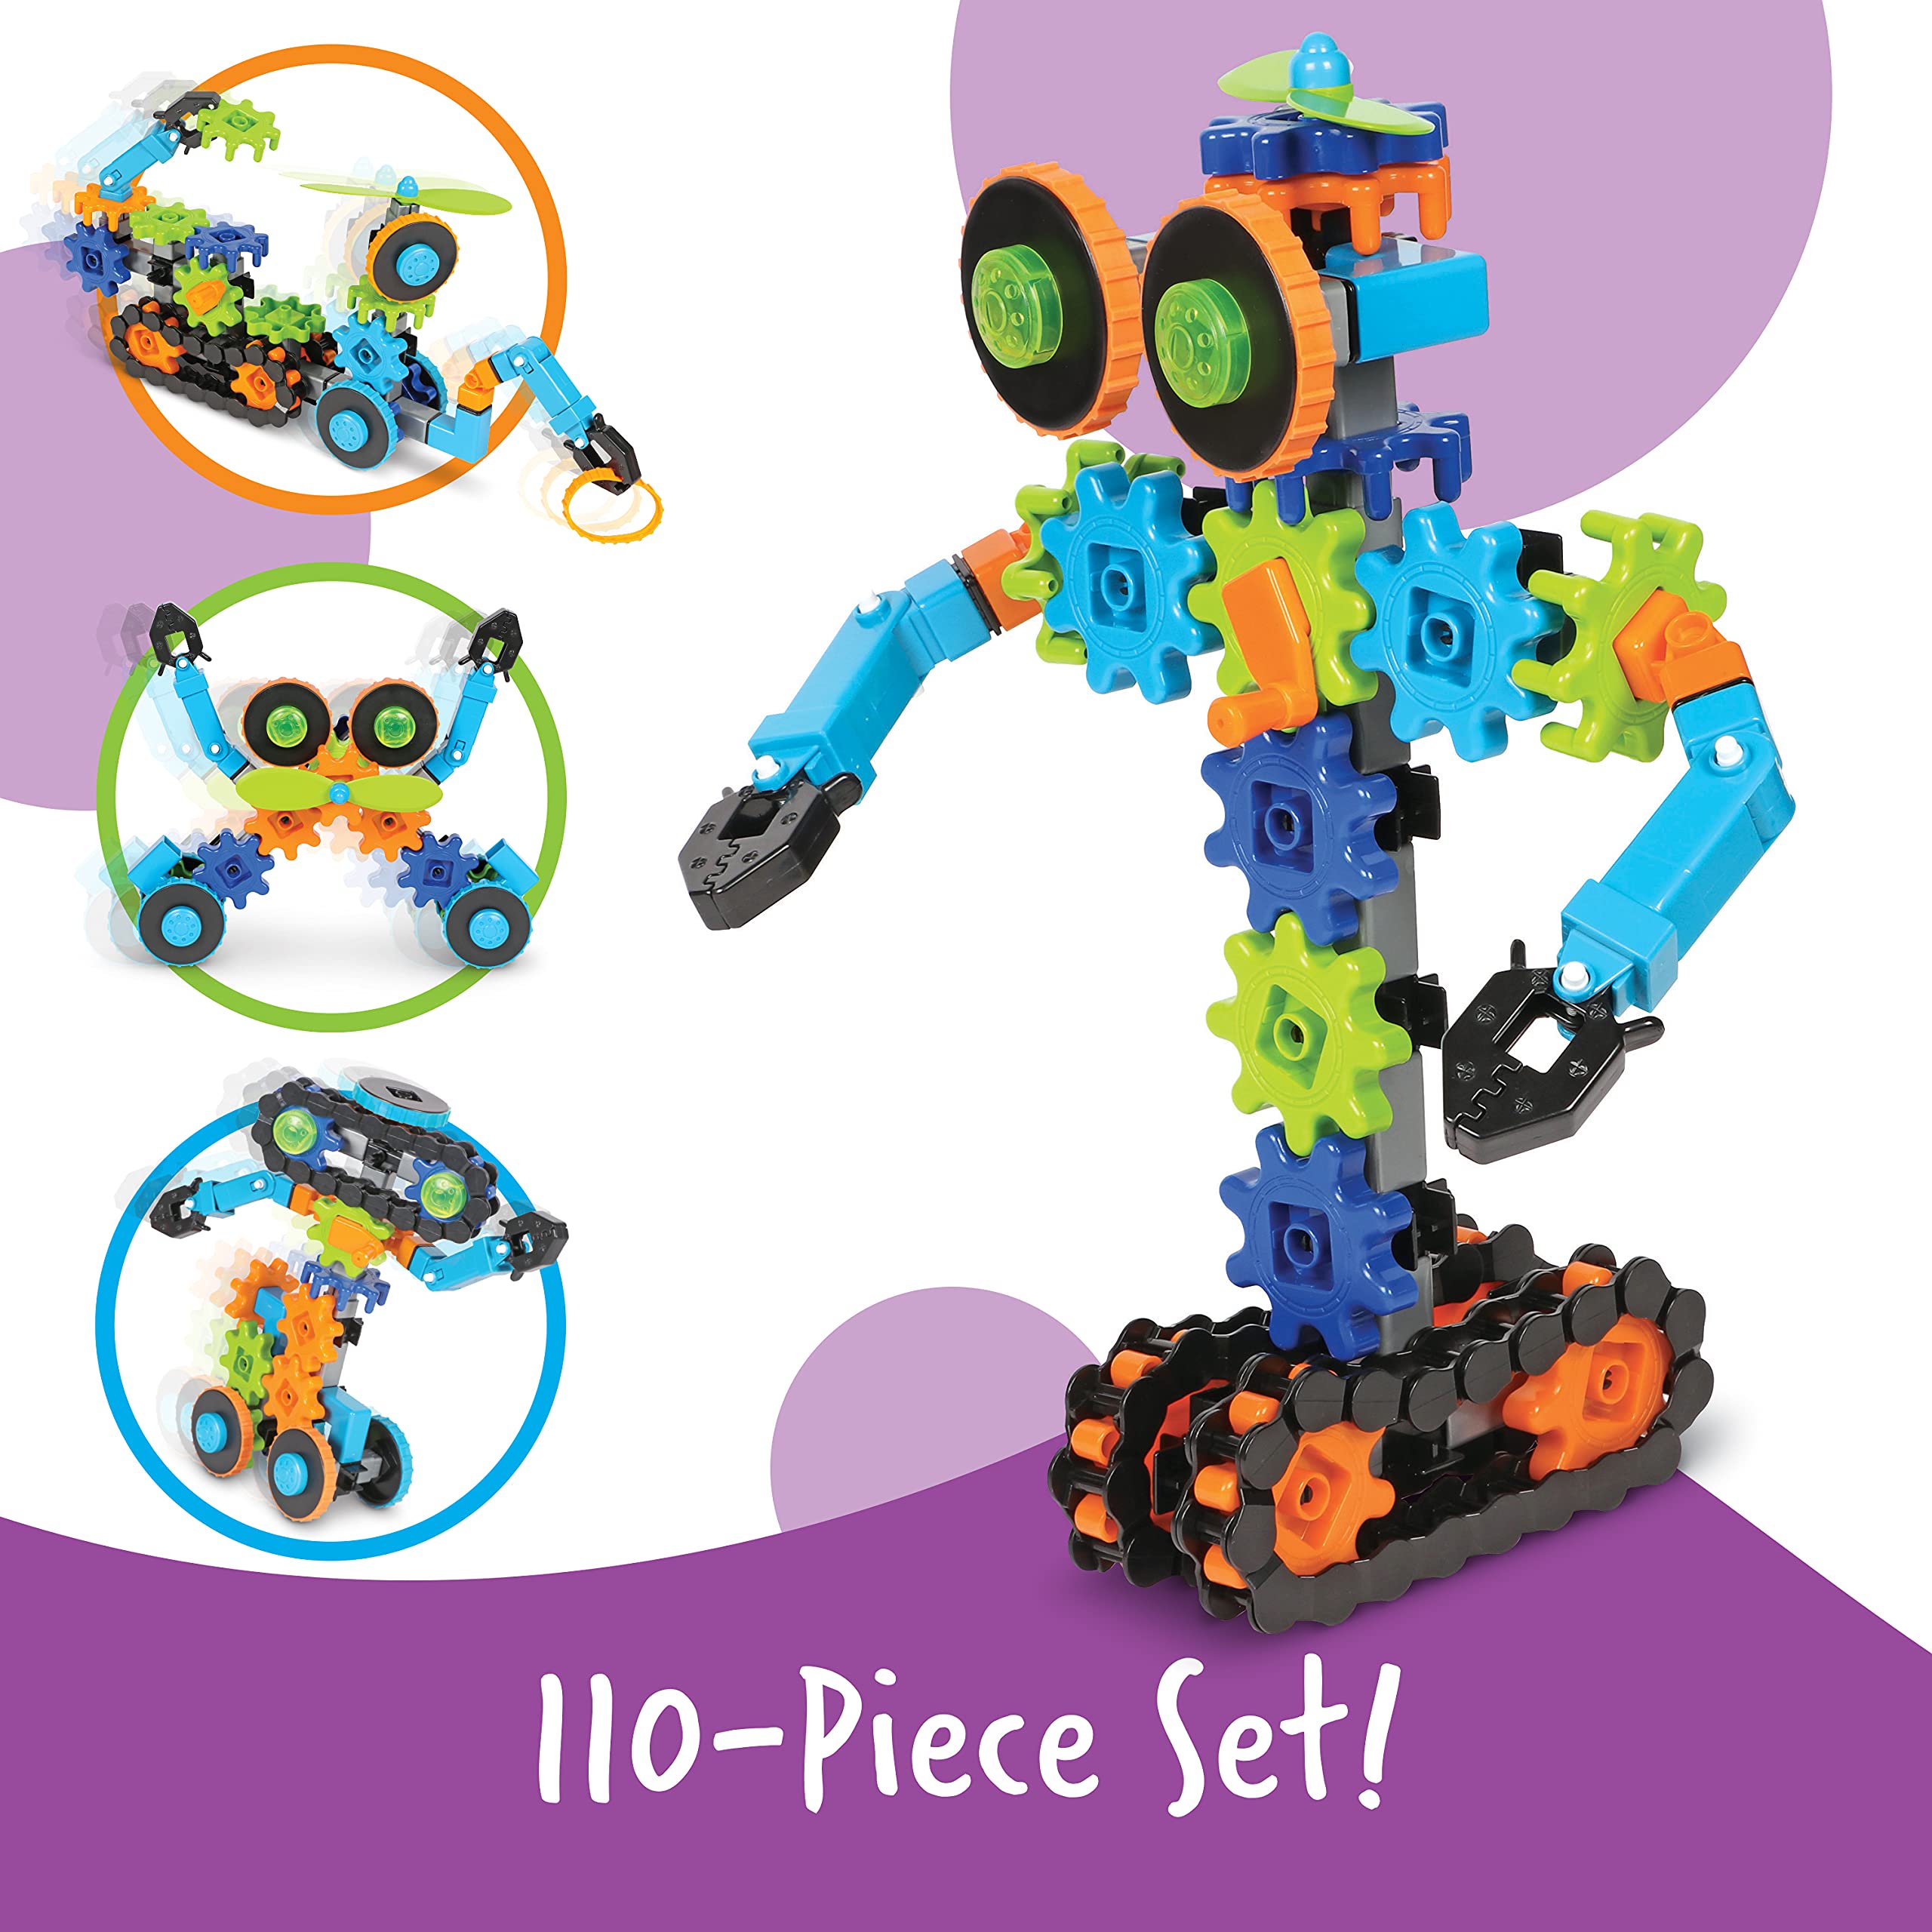 Learning Resources Gears! Gears! Gears! Robots in Motion Building Set - 116 Pieces, Ages 5+, Robot Toy, STEM Toys for Kids, Robots for Kids, Back to School Gifts